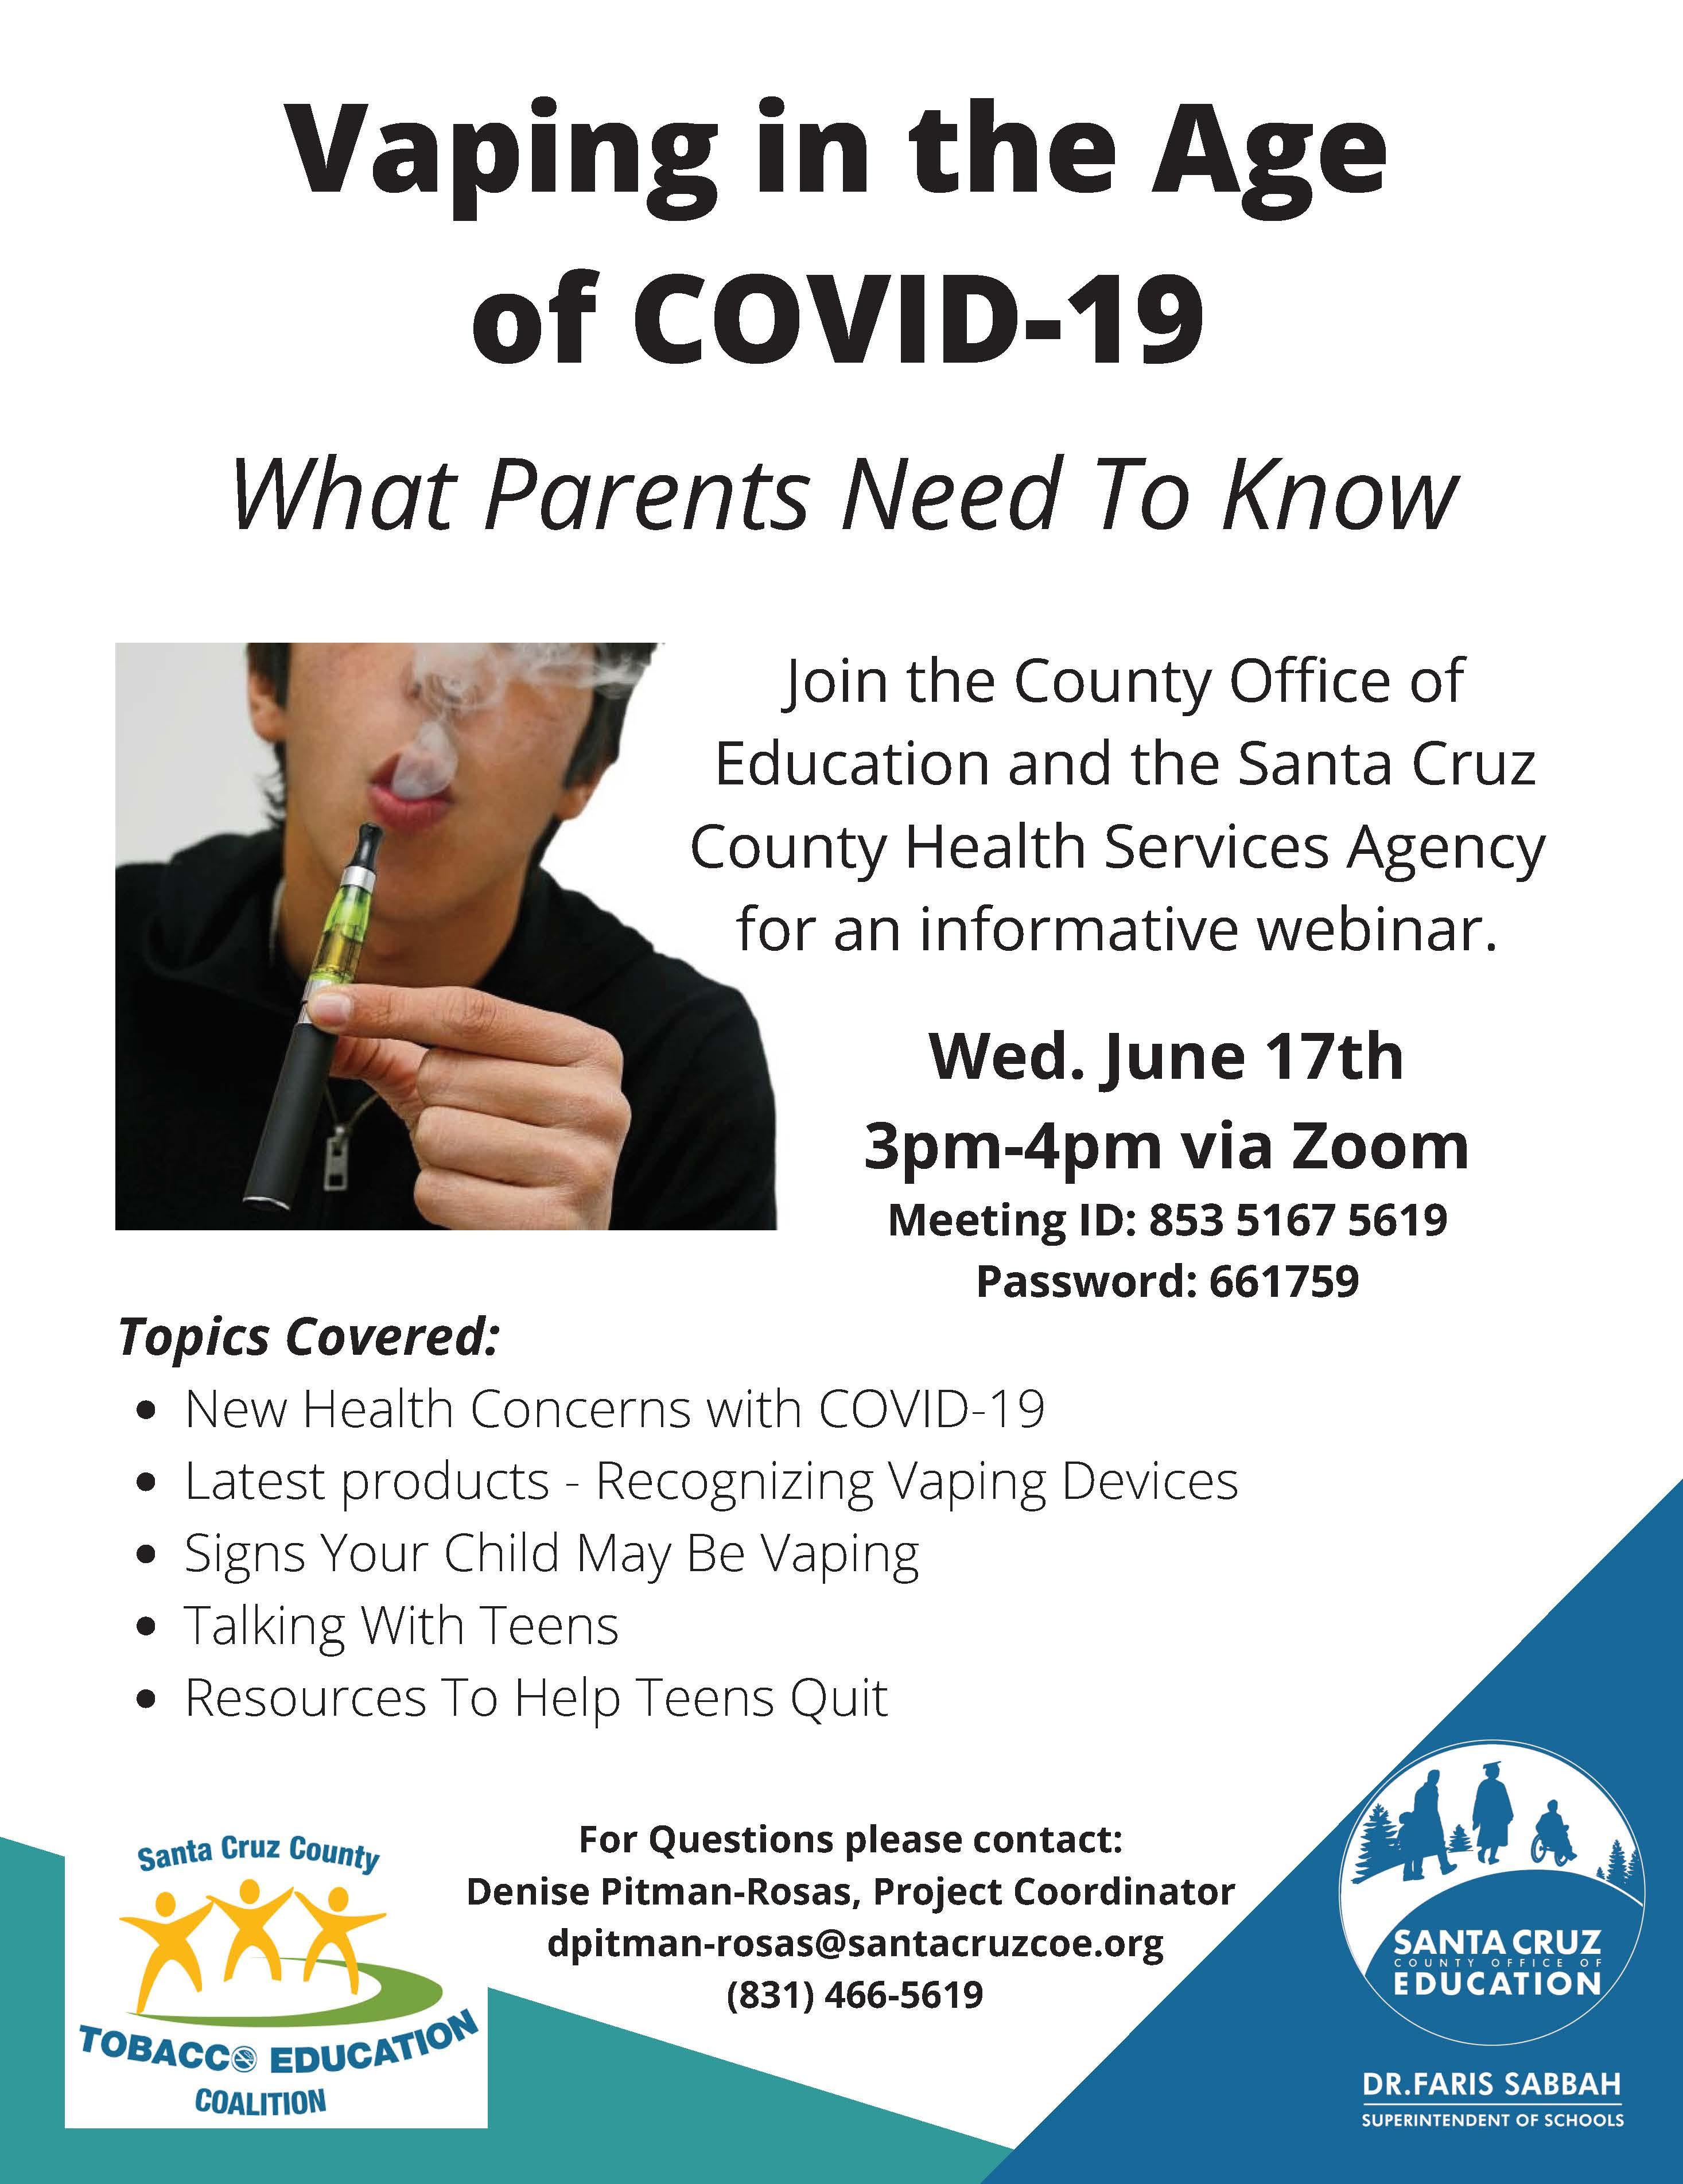 Vaping in Age of COVD-19 Zoom webinar; call 831-466-5619 for info